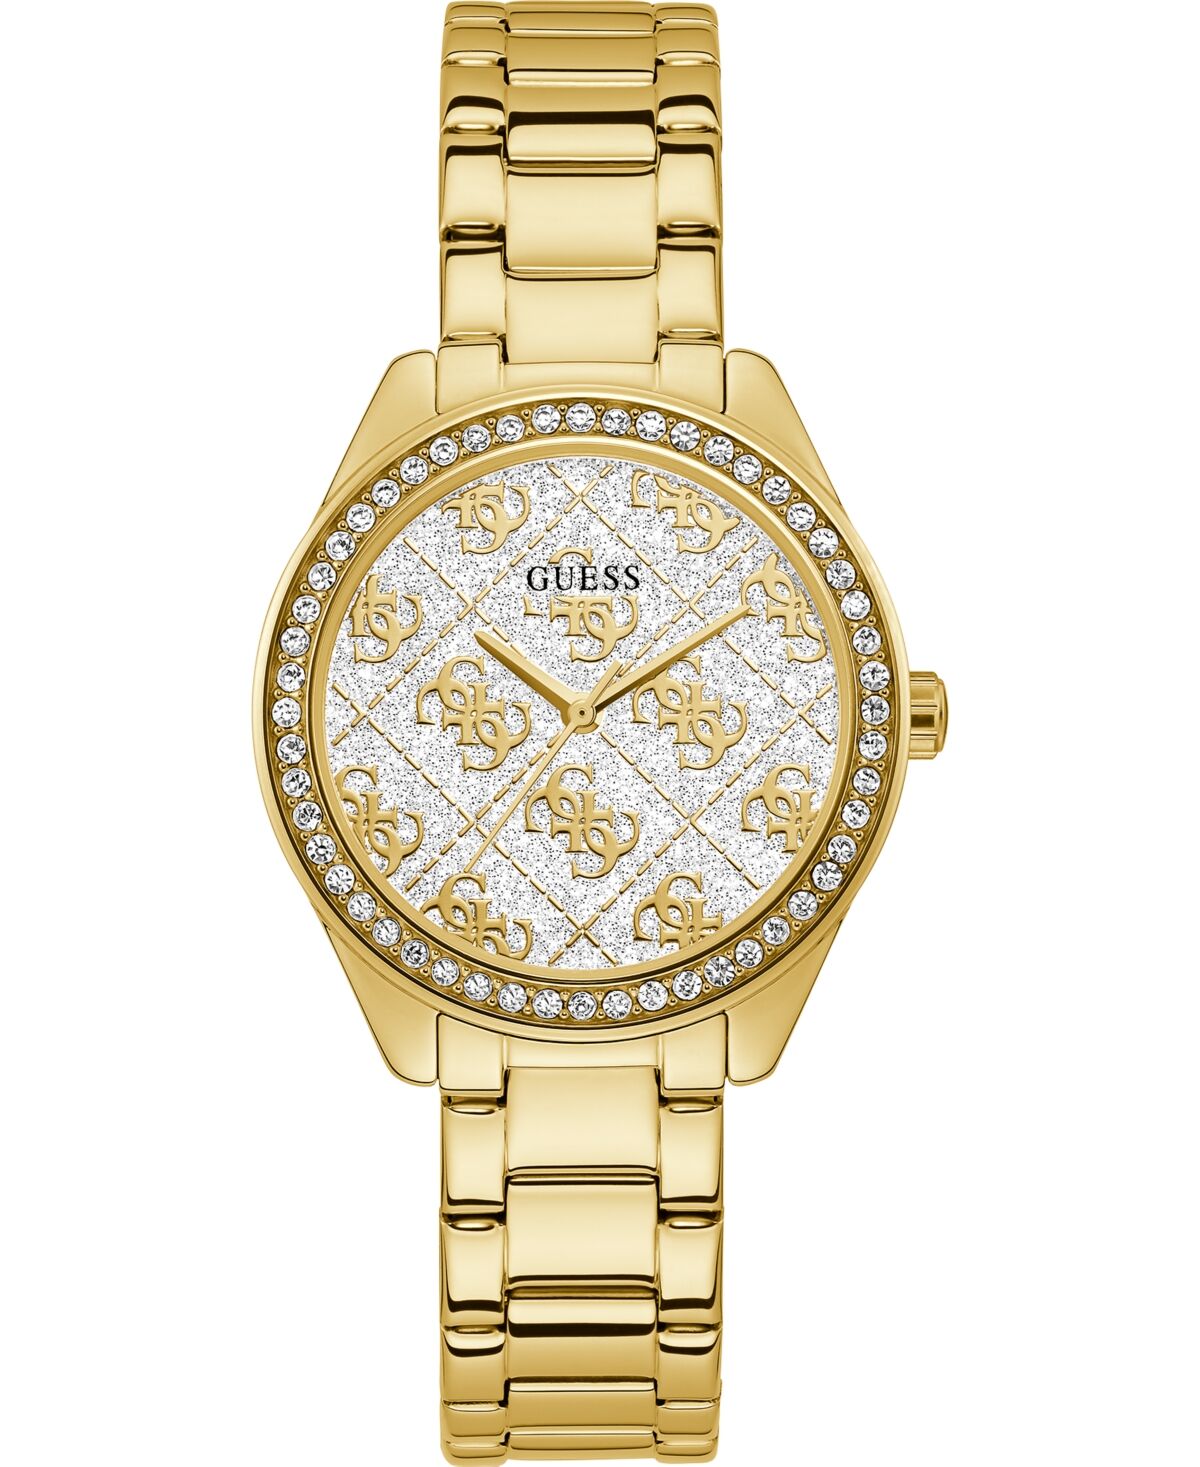 Guess Women's Gold-Tone Stainless Steel Bracelet Watch 36.5mm - Yellow